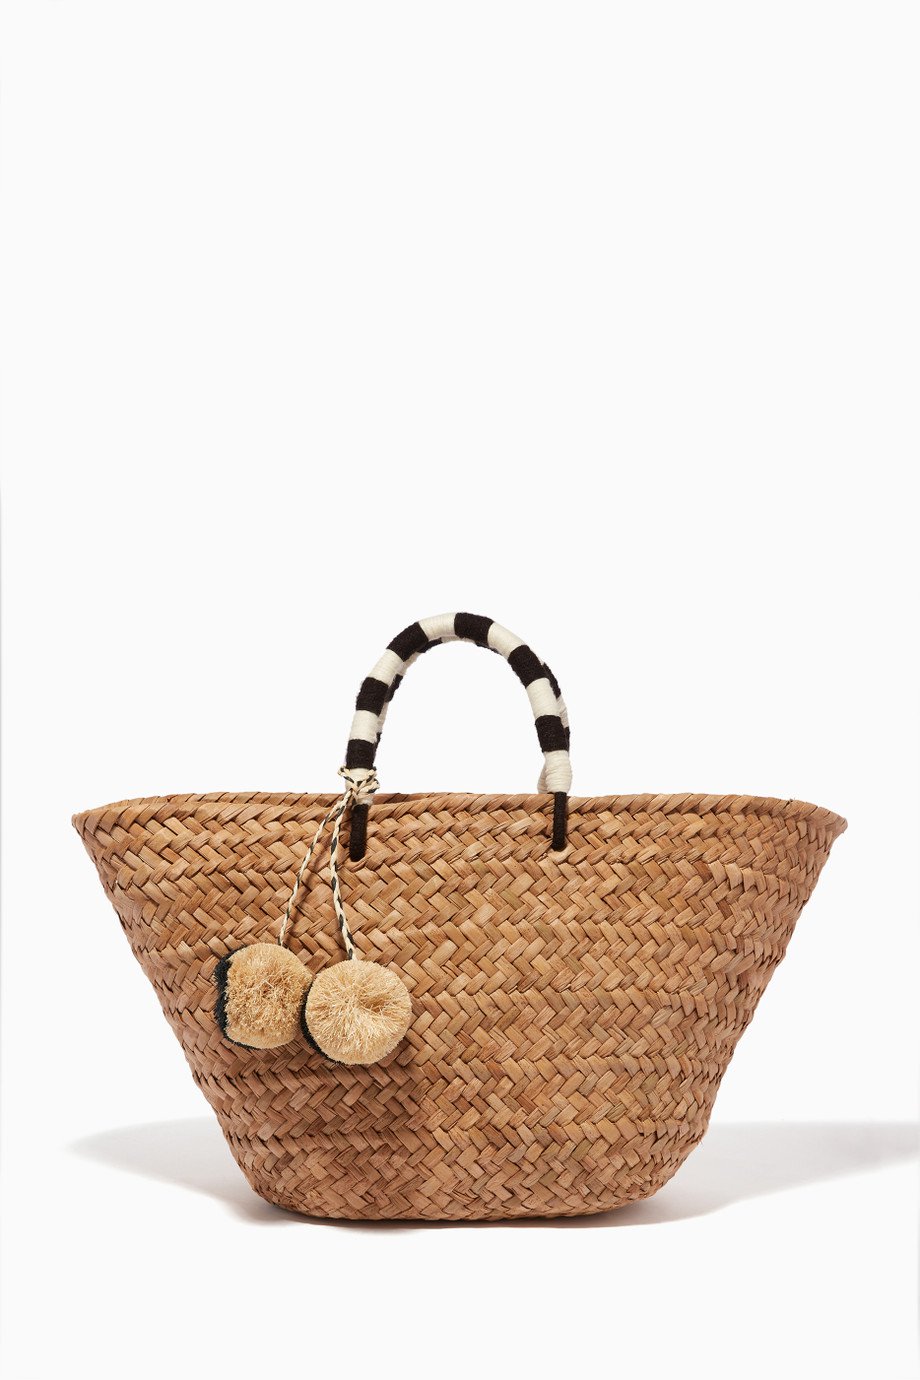 Go Full On Fashionista With These Bangin’ Beach Bags | Cosmopolitan ...